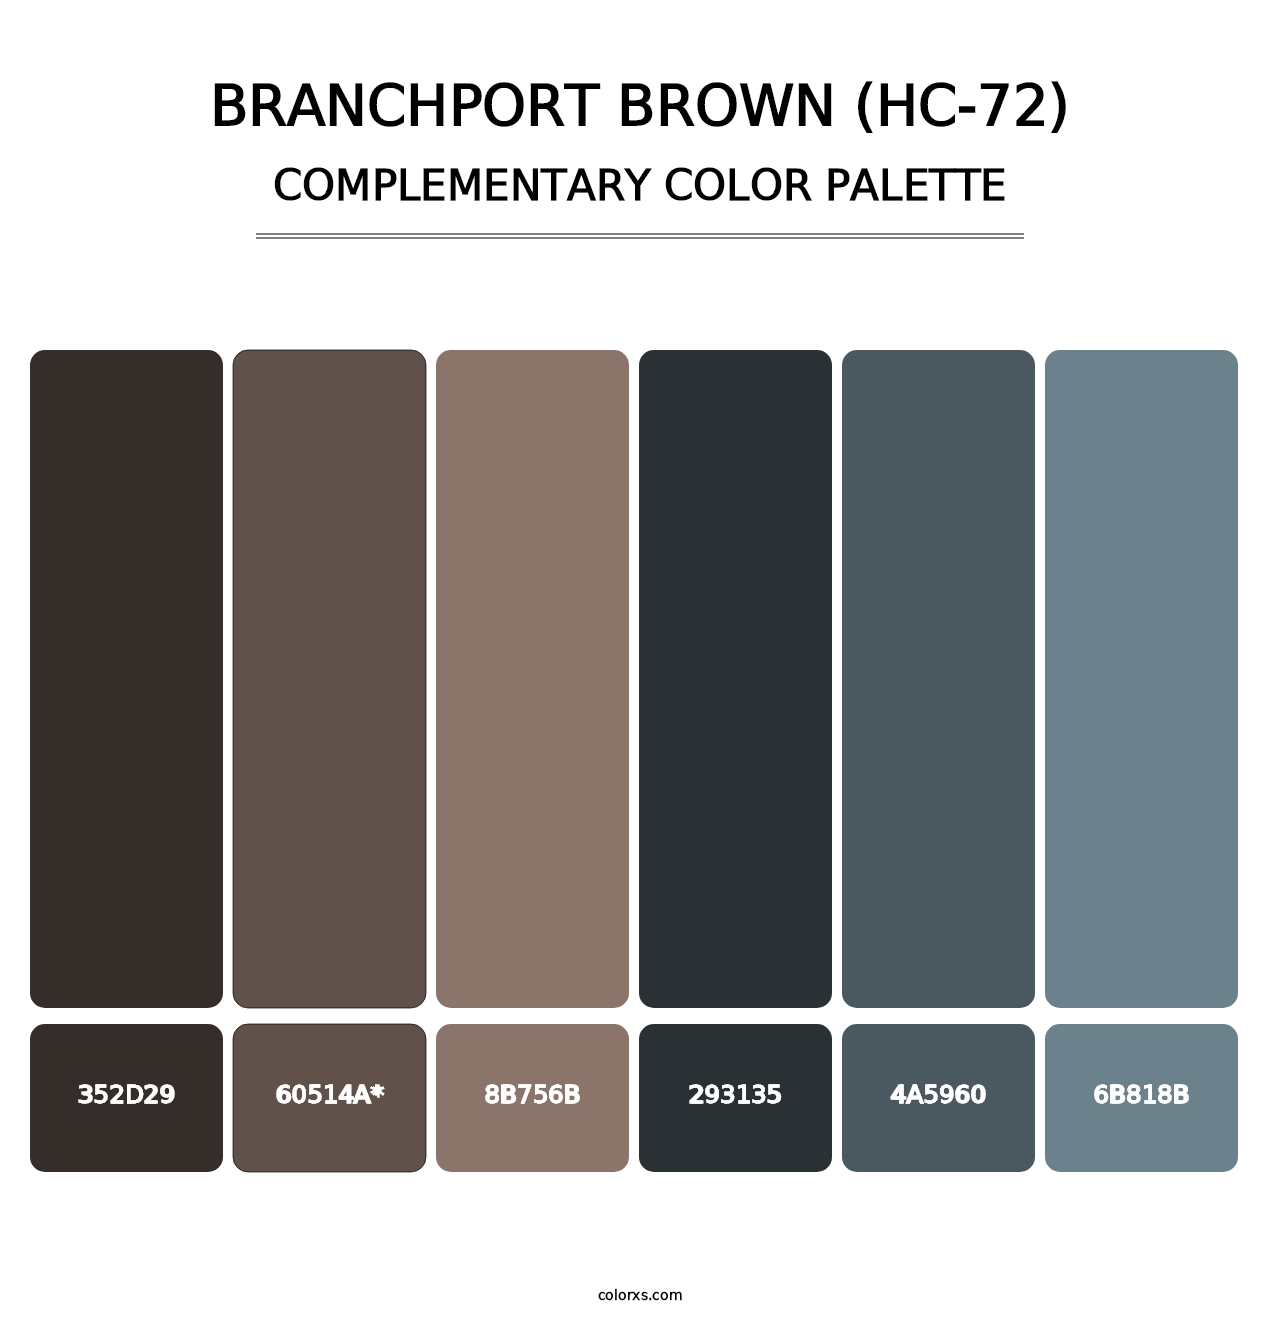 Branchport Brown (HC-72) - Complementary Color Palette